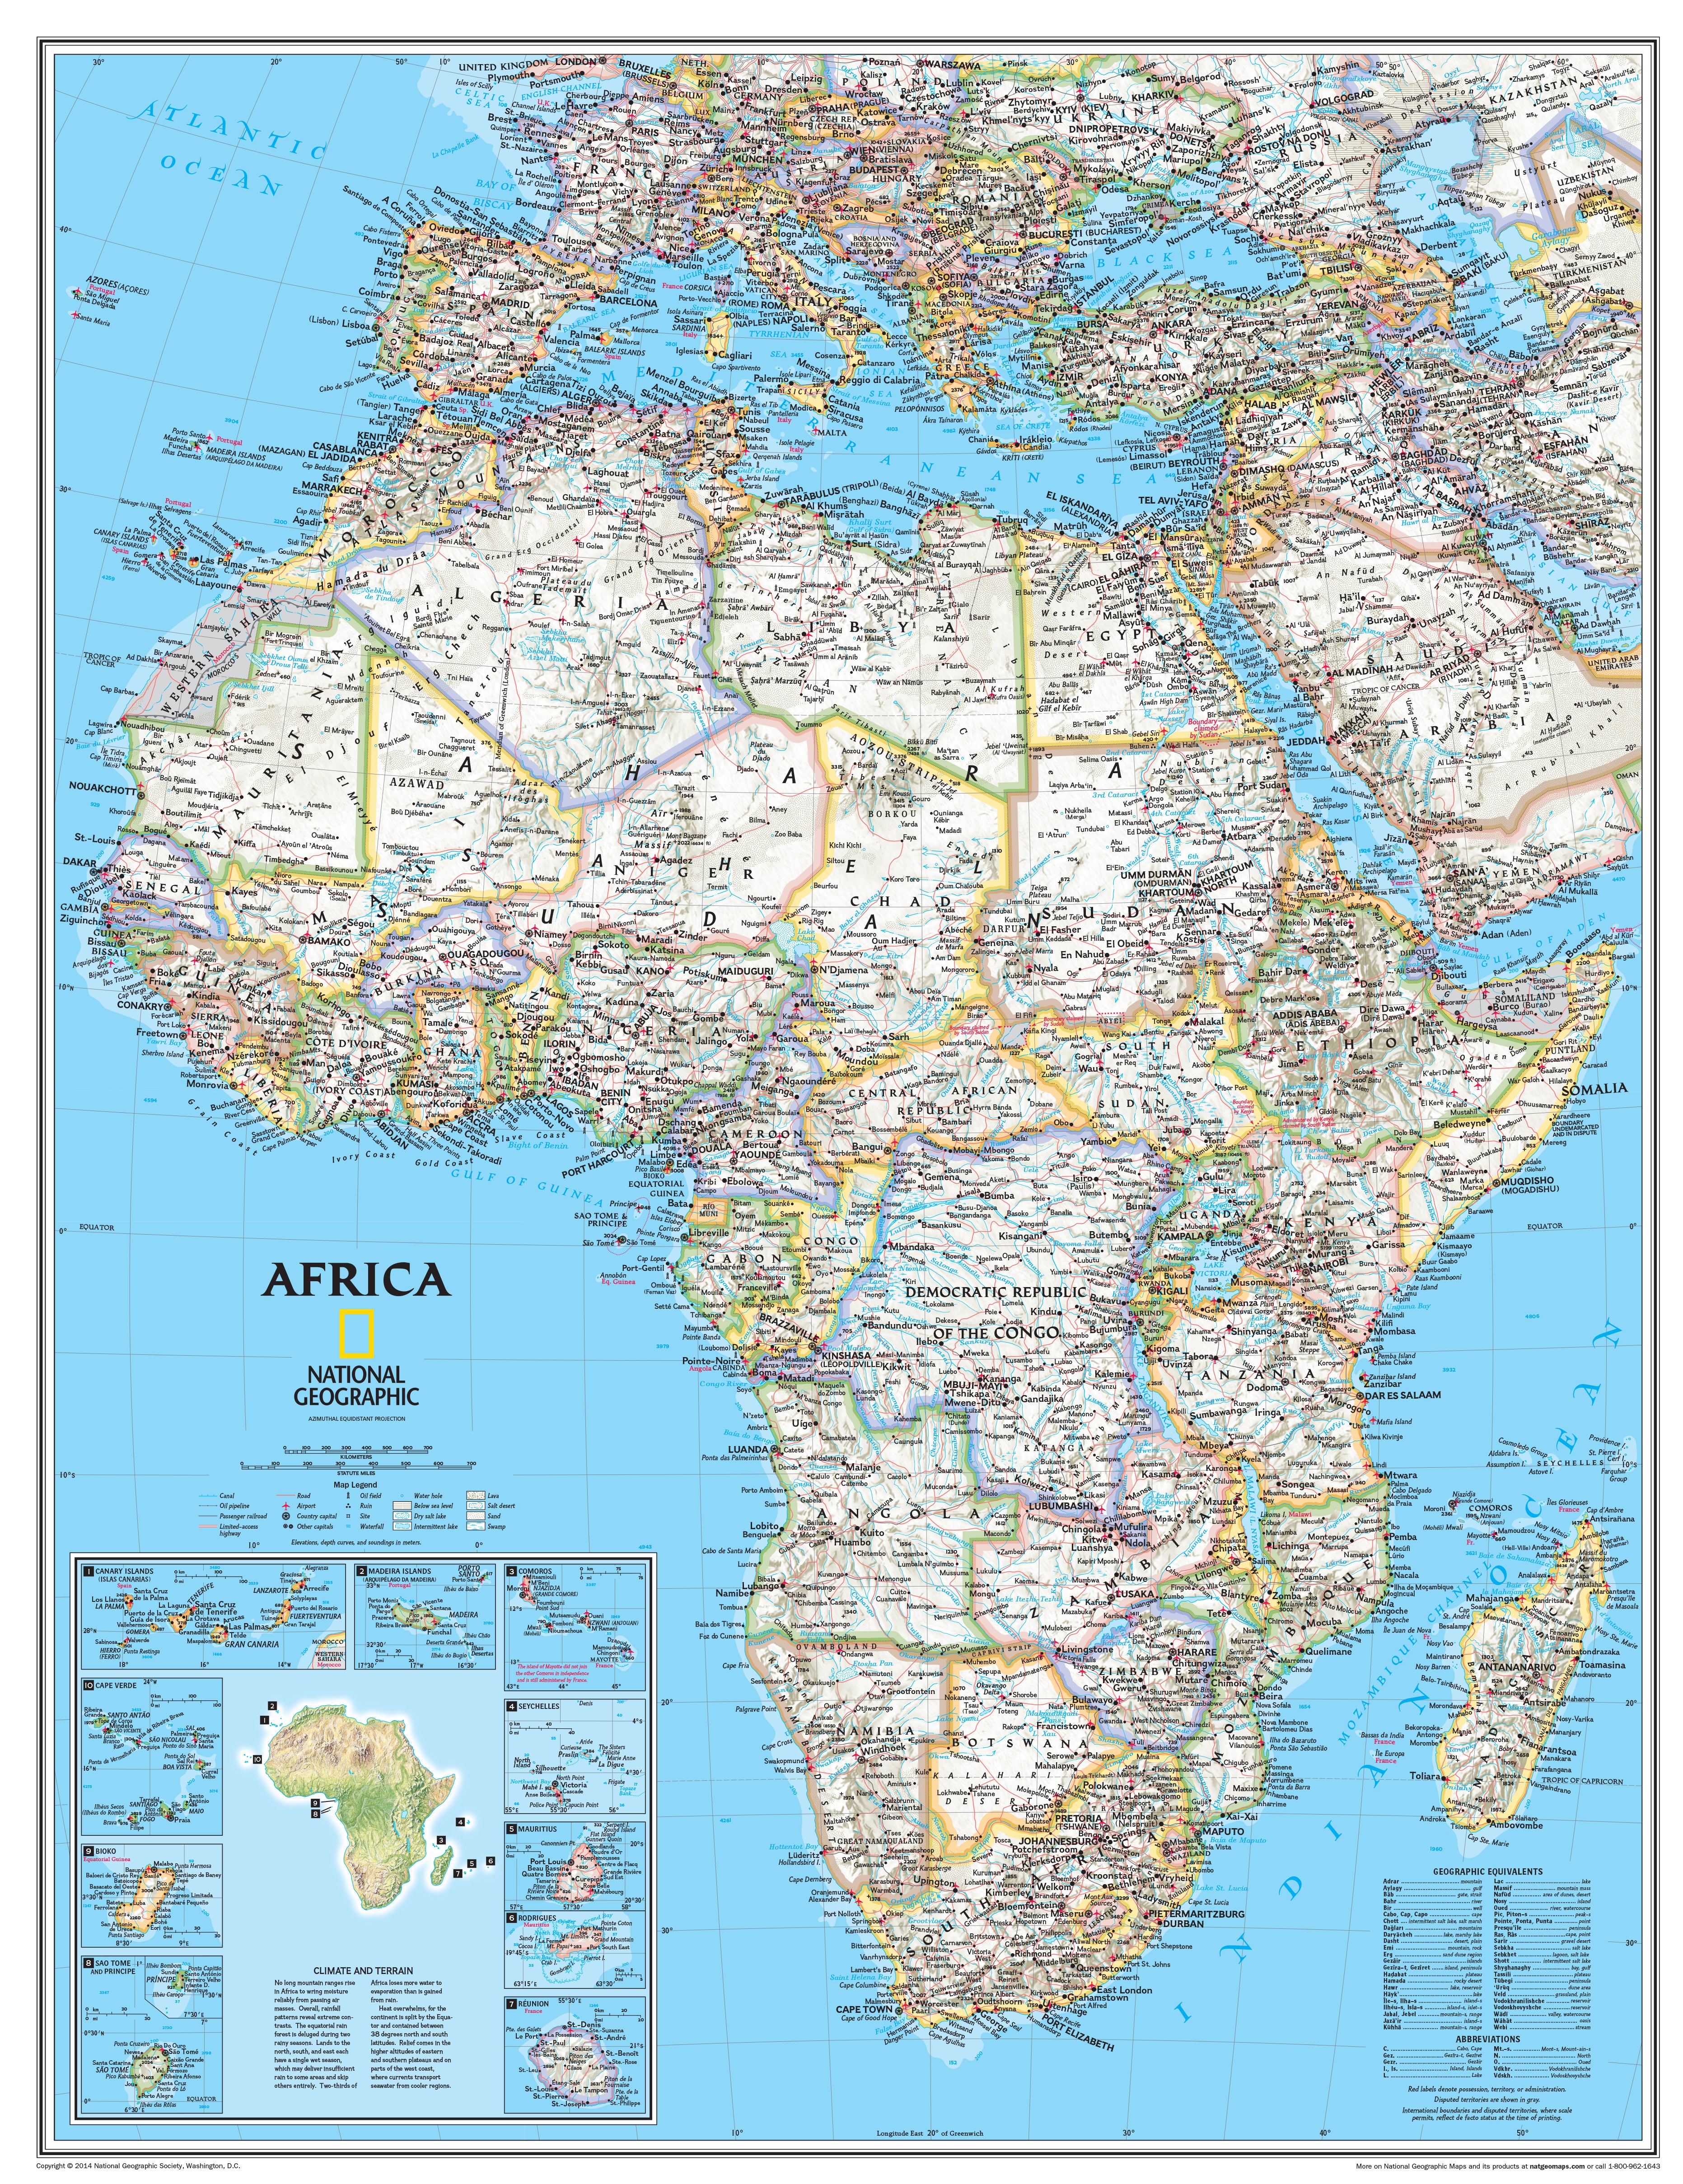 Africa a part of National Geographic Political 7 Continent Maps Classroom Pull Down 7 Map Bundle